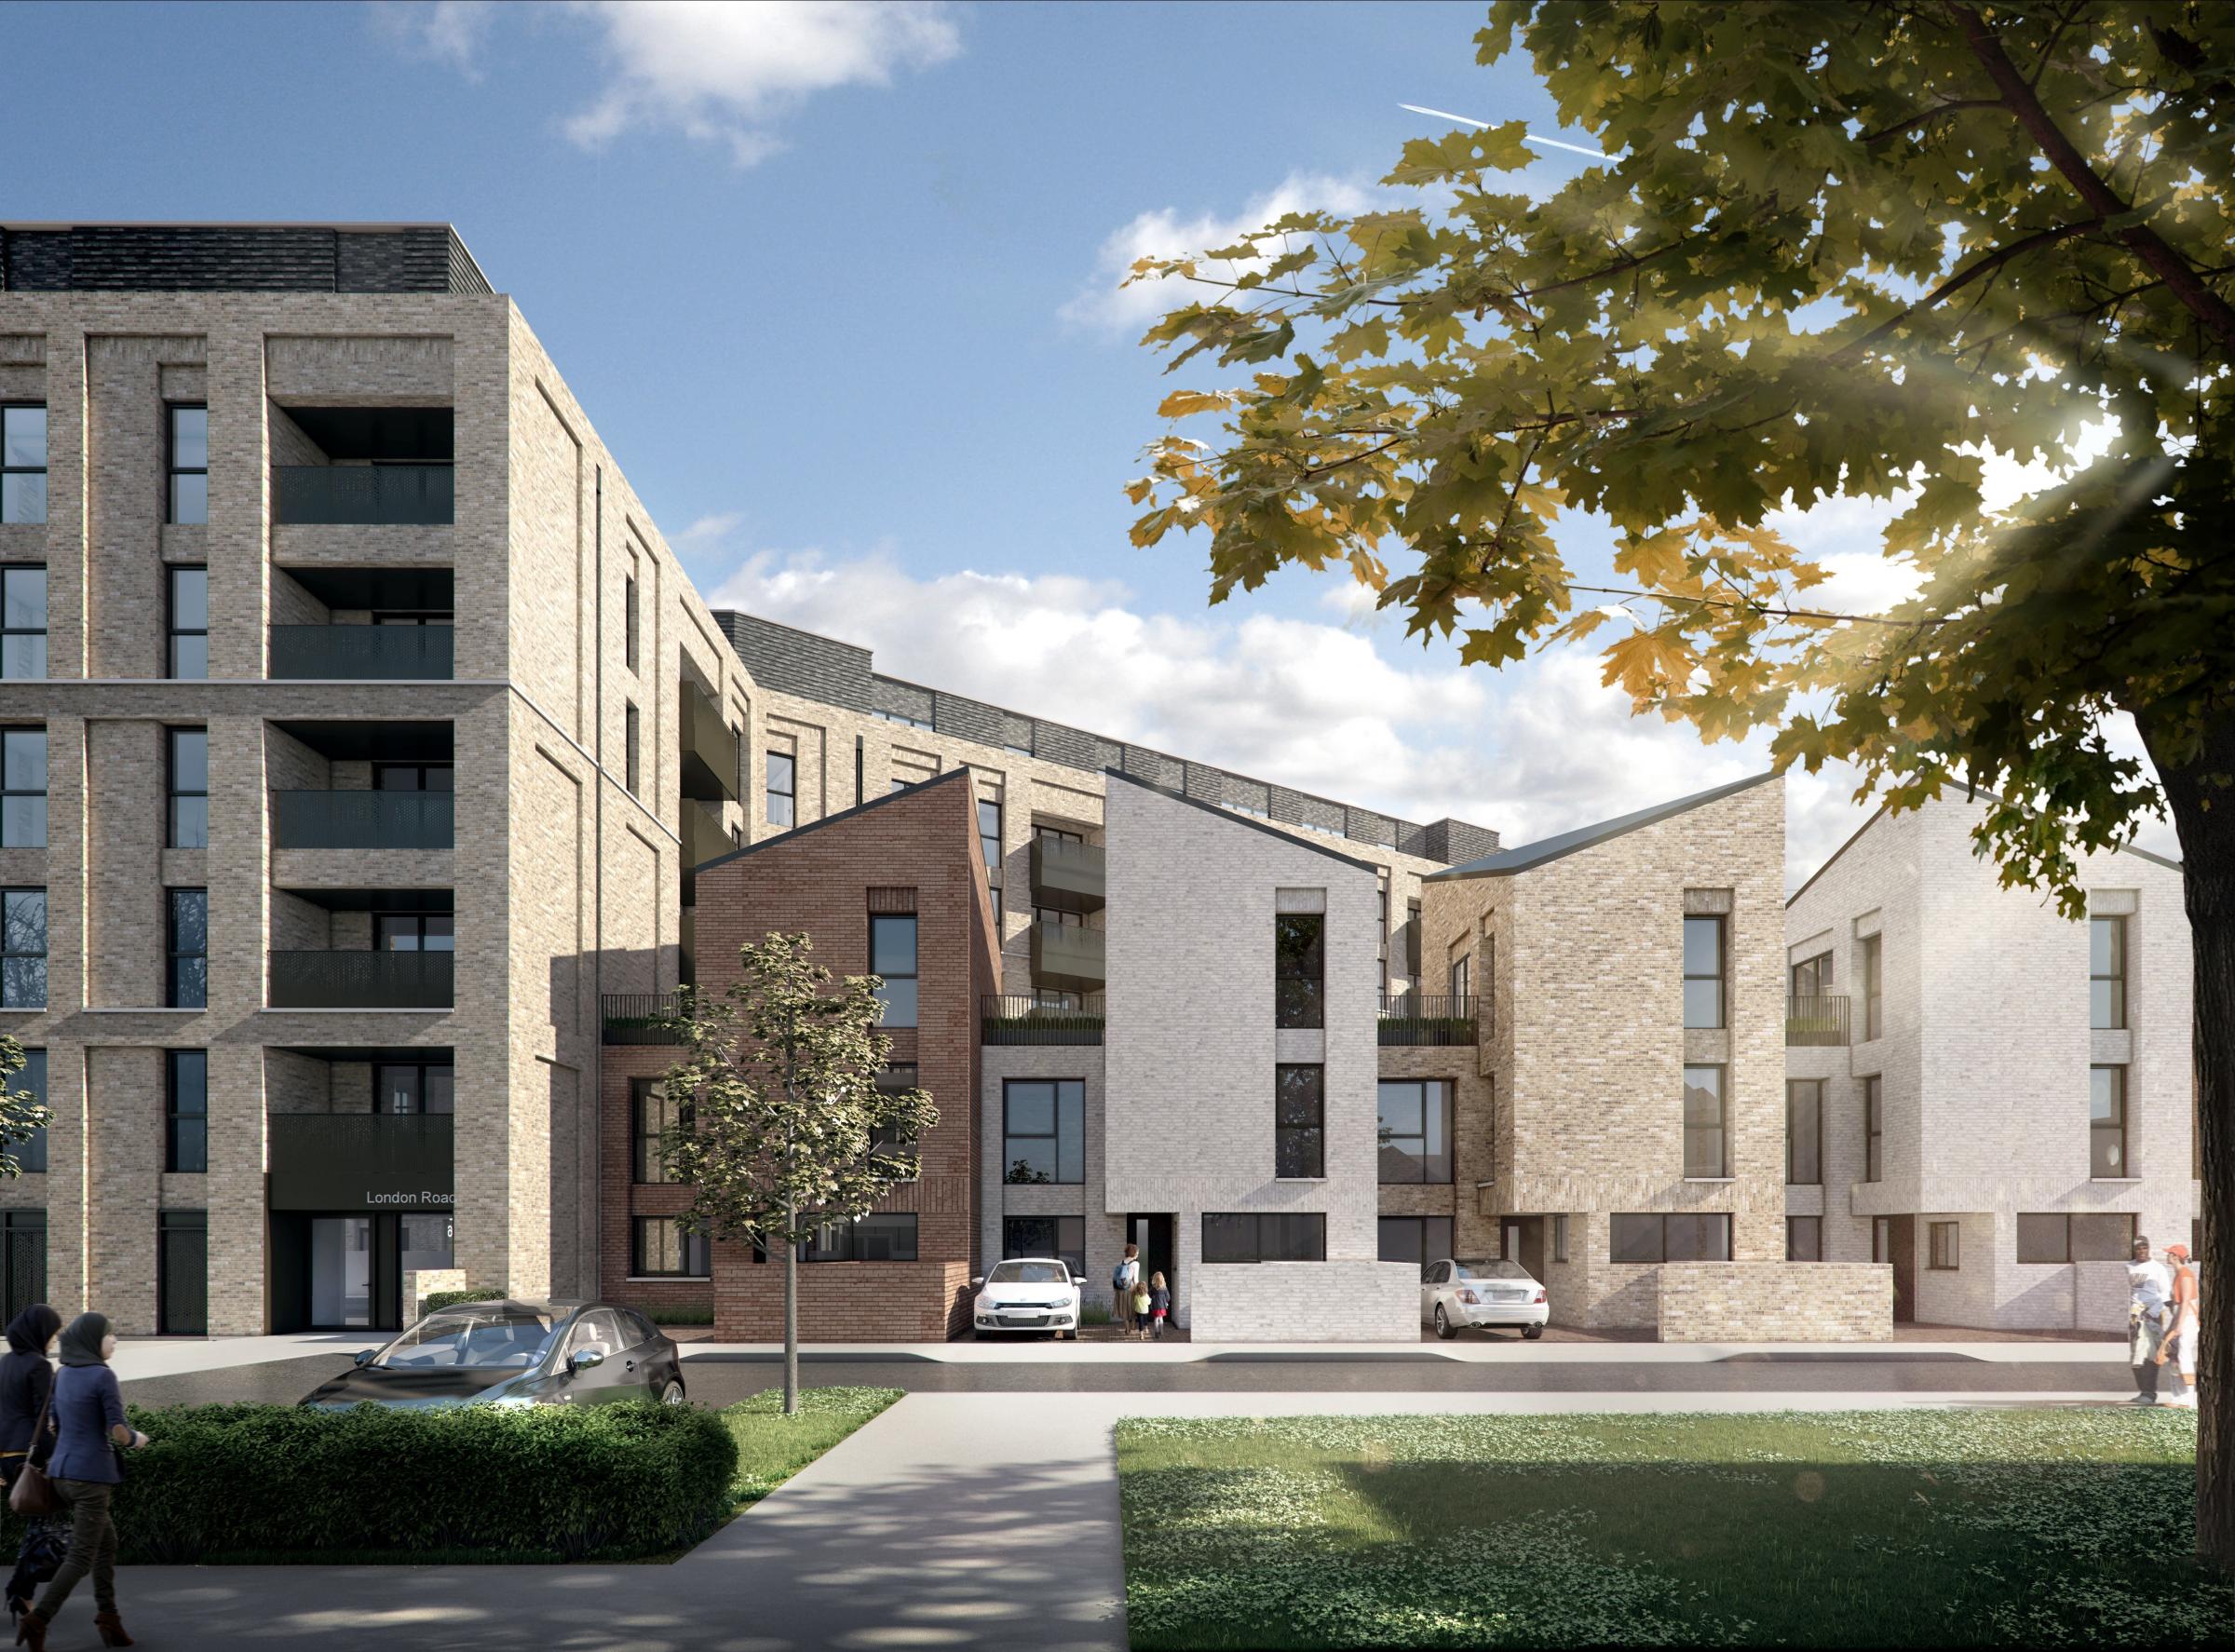 New Council homes